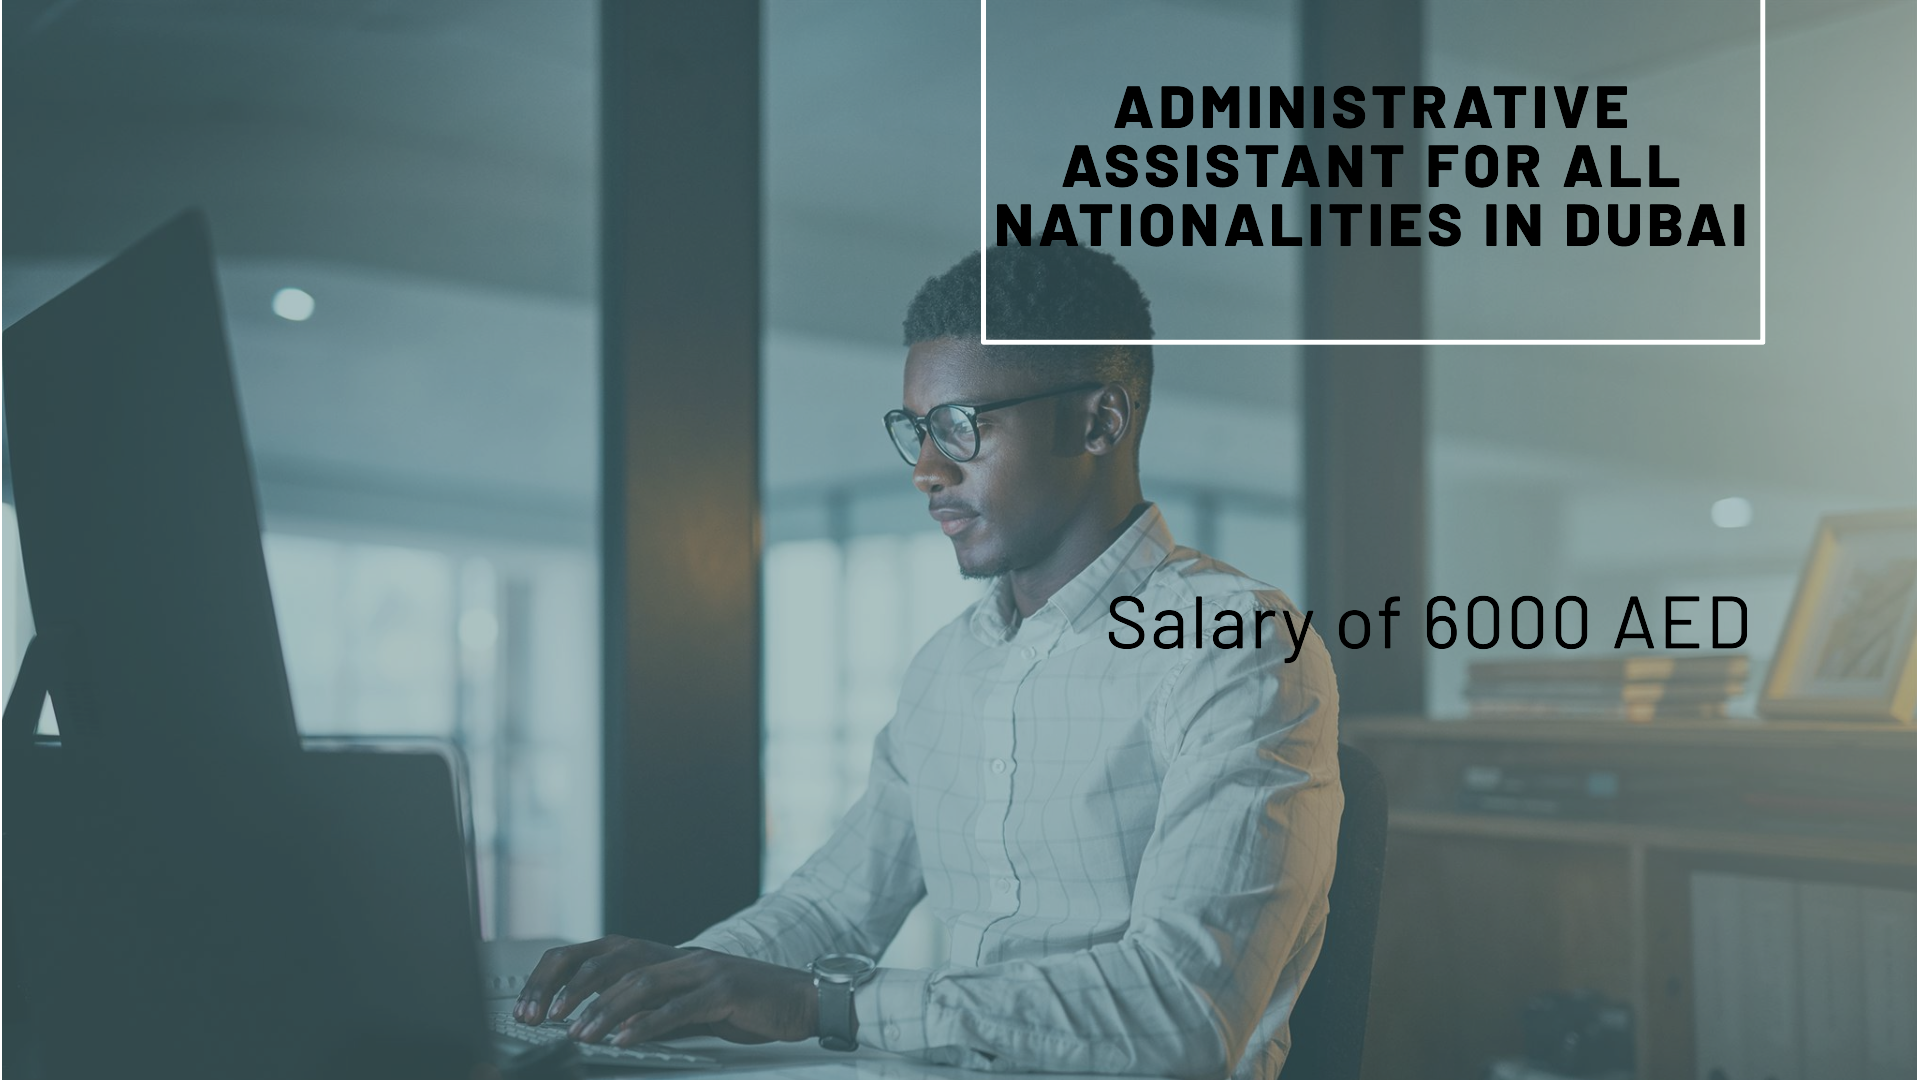 administrative assistant dubai for all nationalities with salary 6000 AED